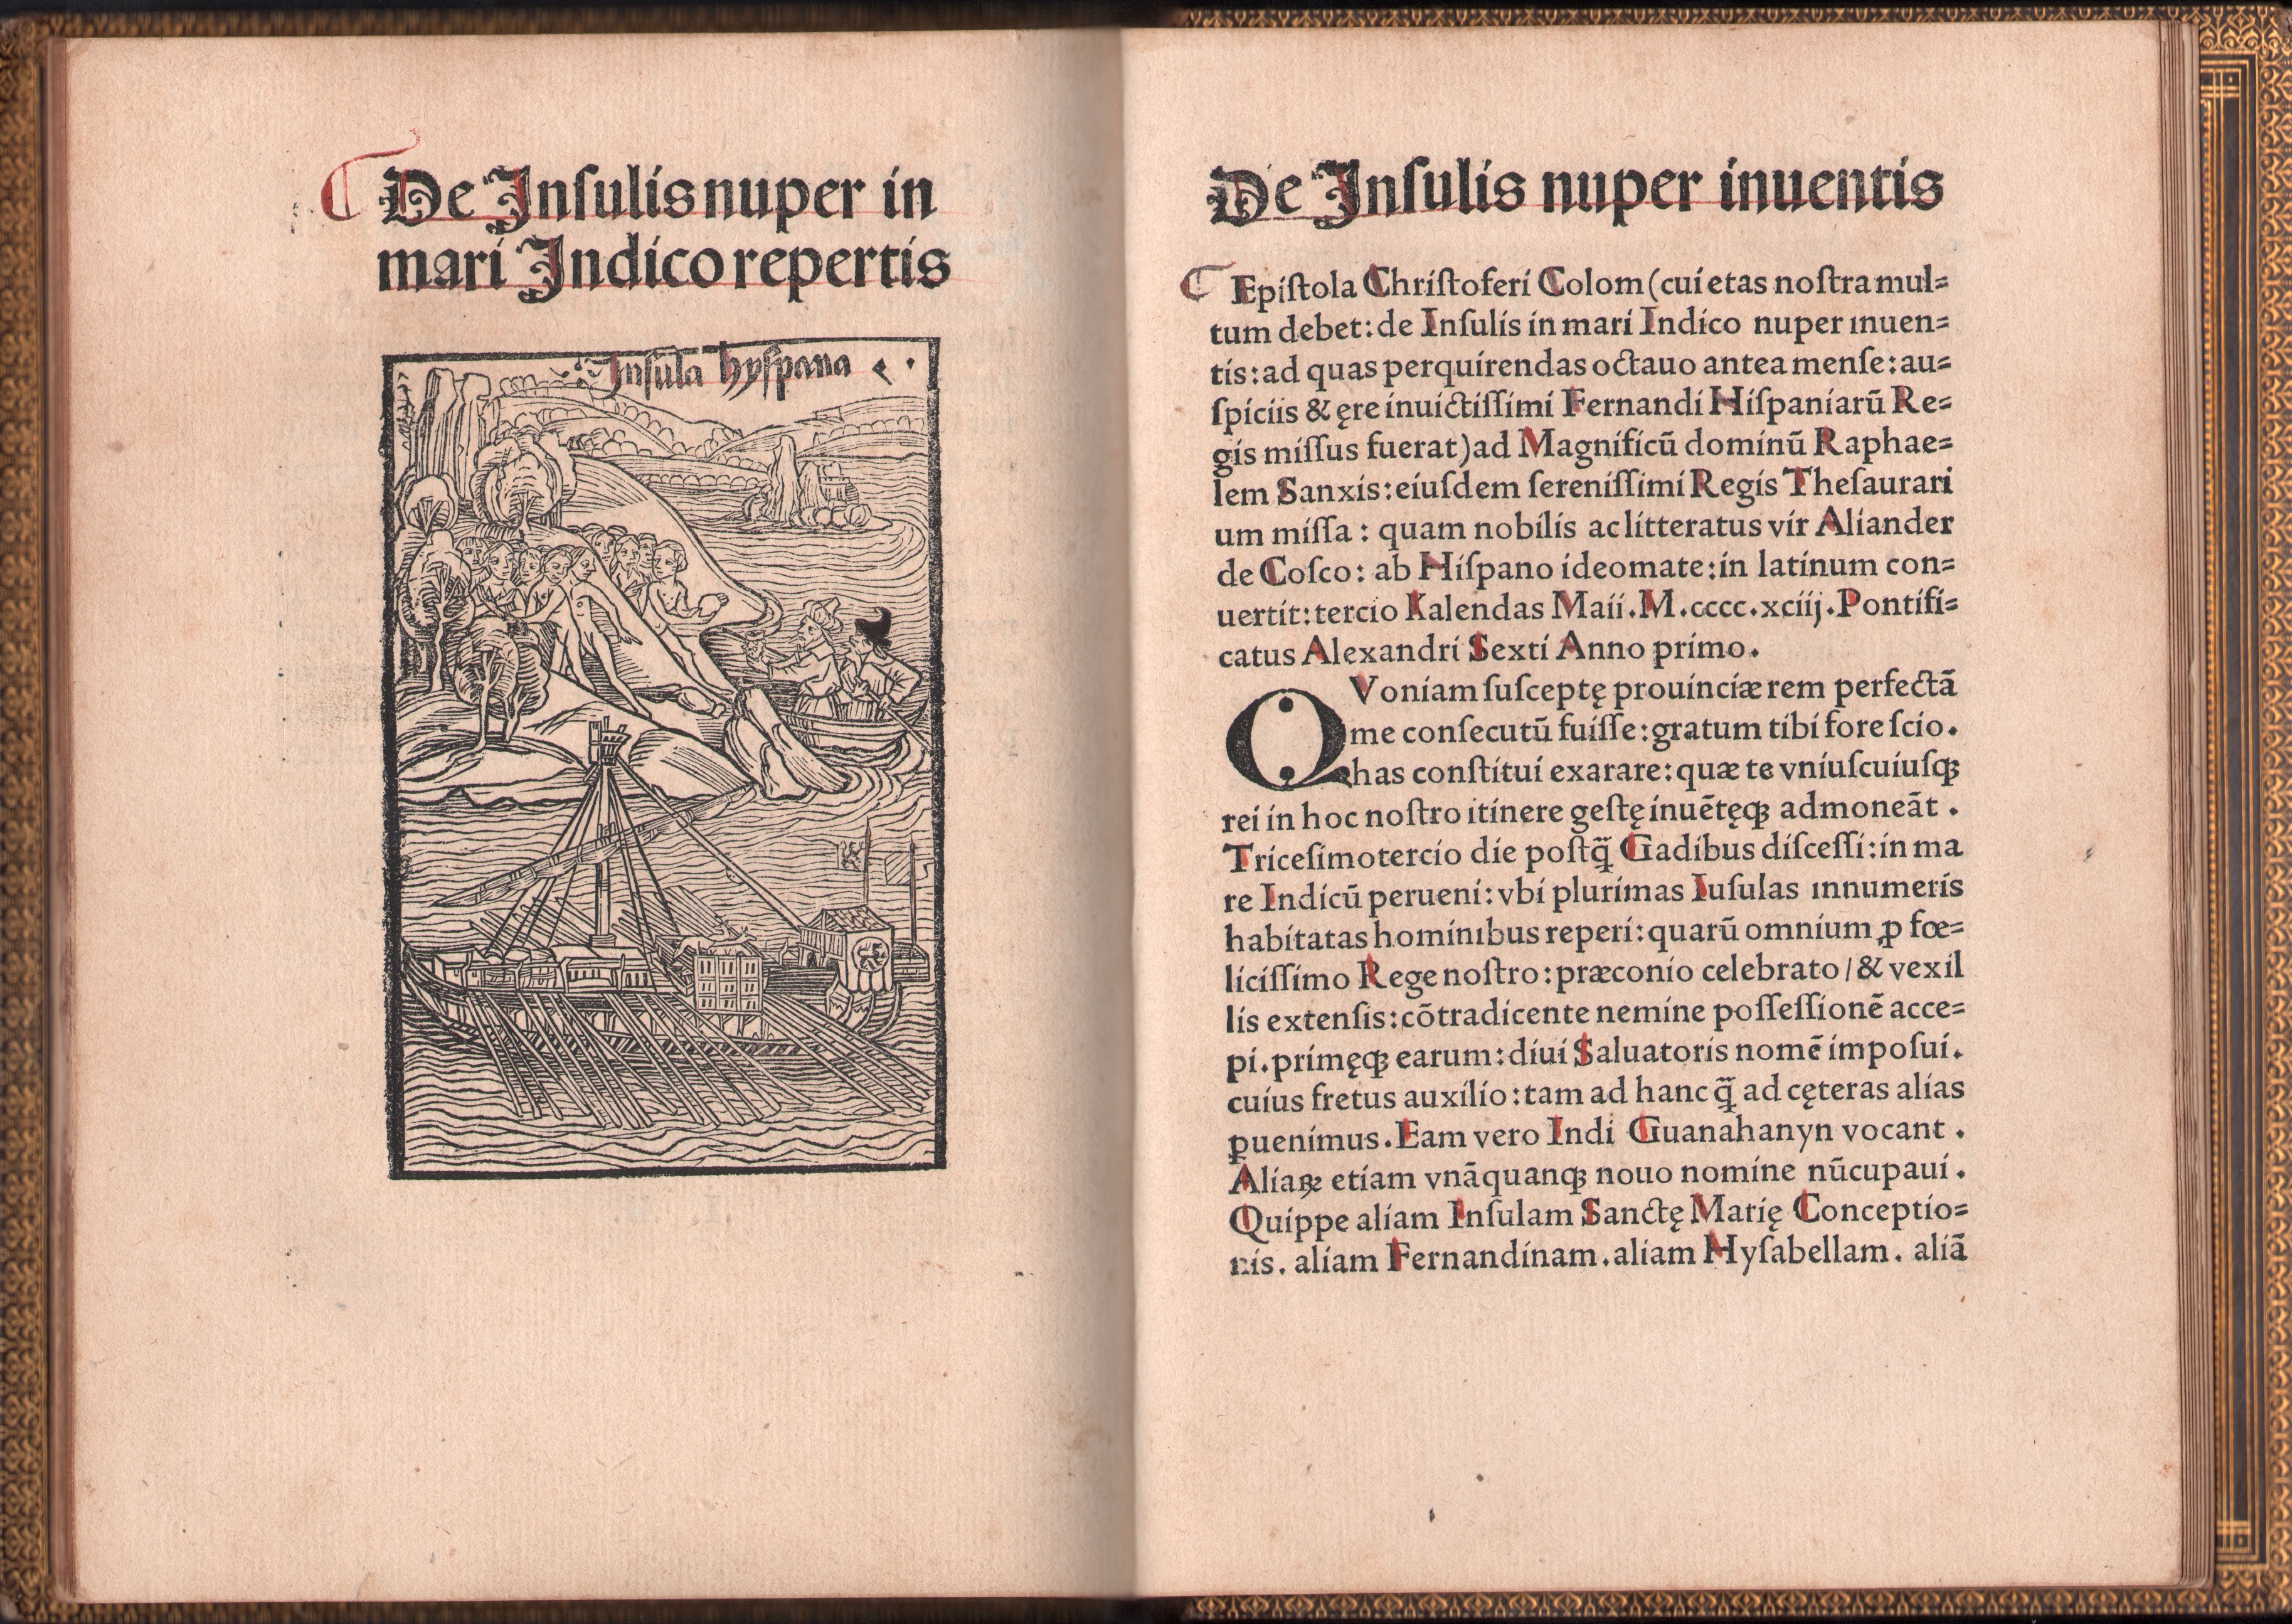 The 1494 Basel edition of Columbus's letter.